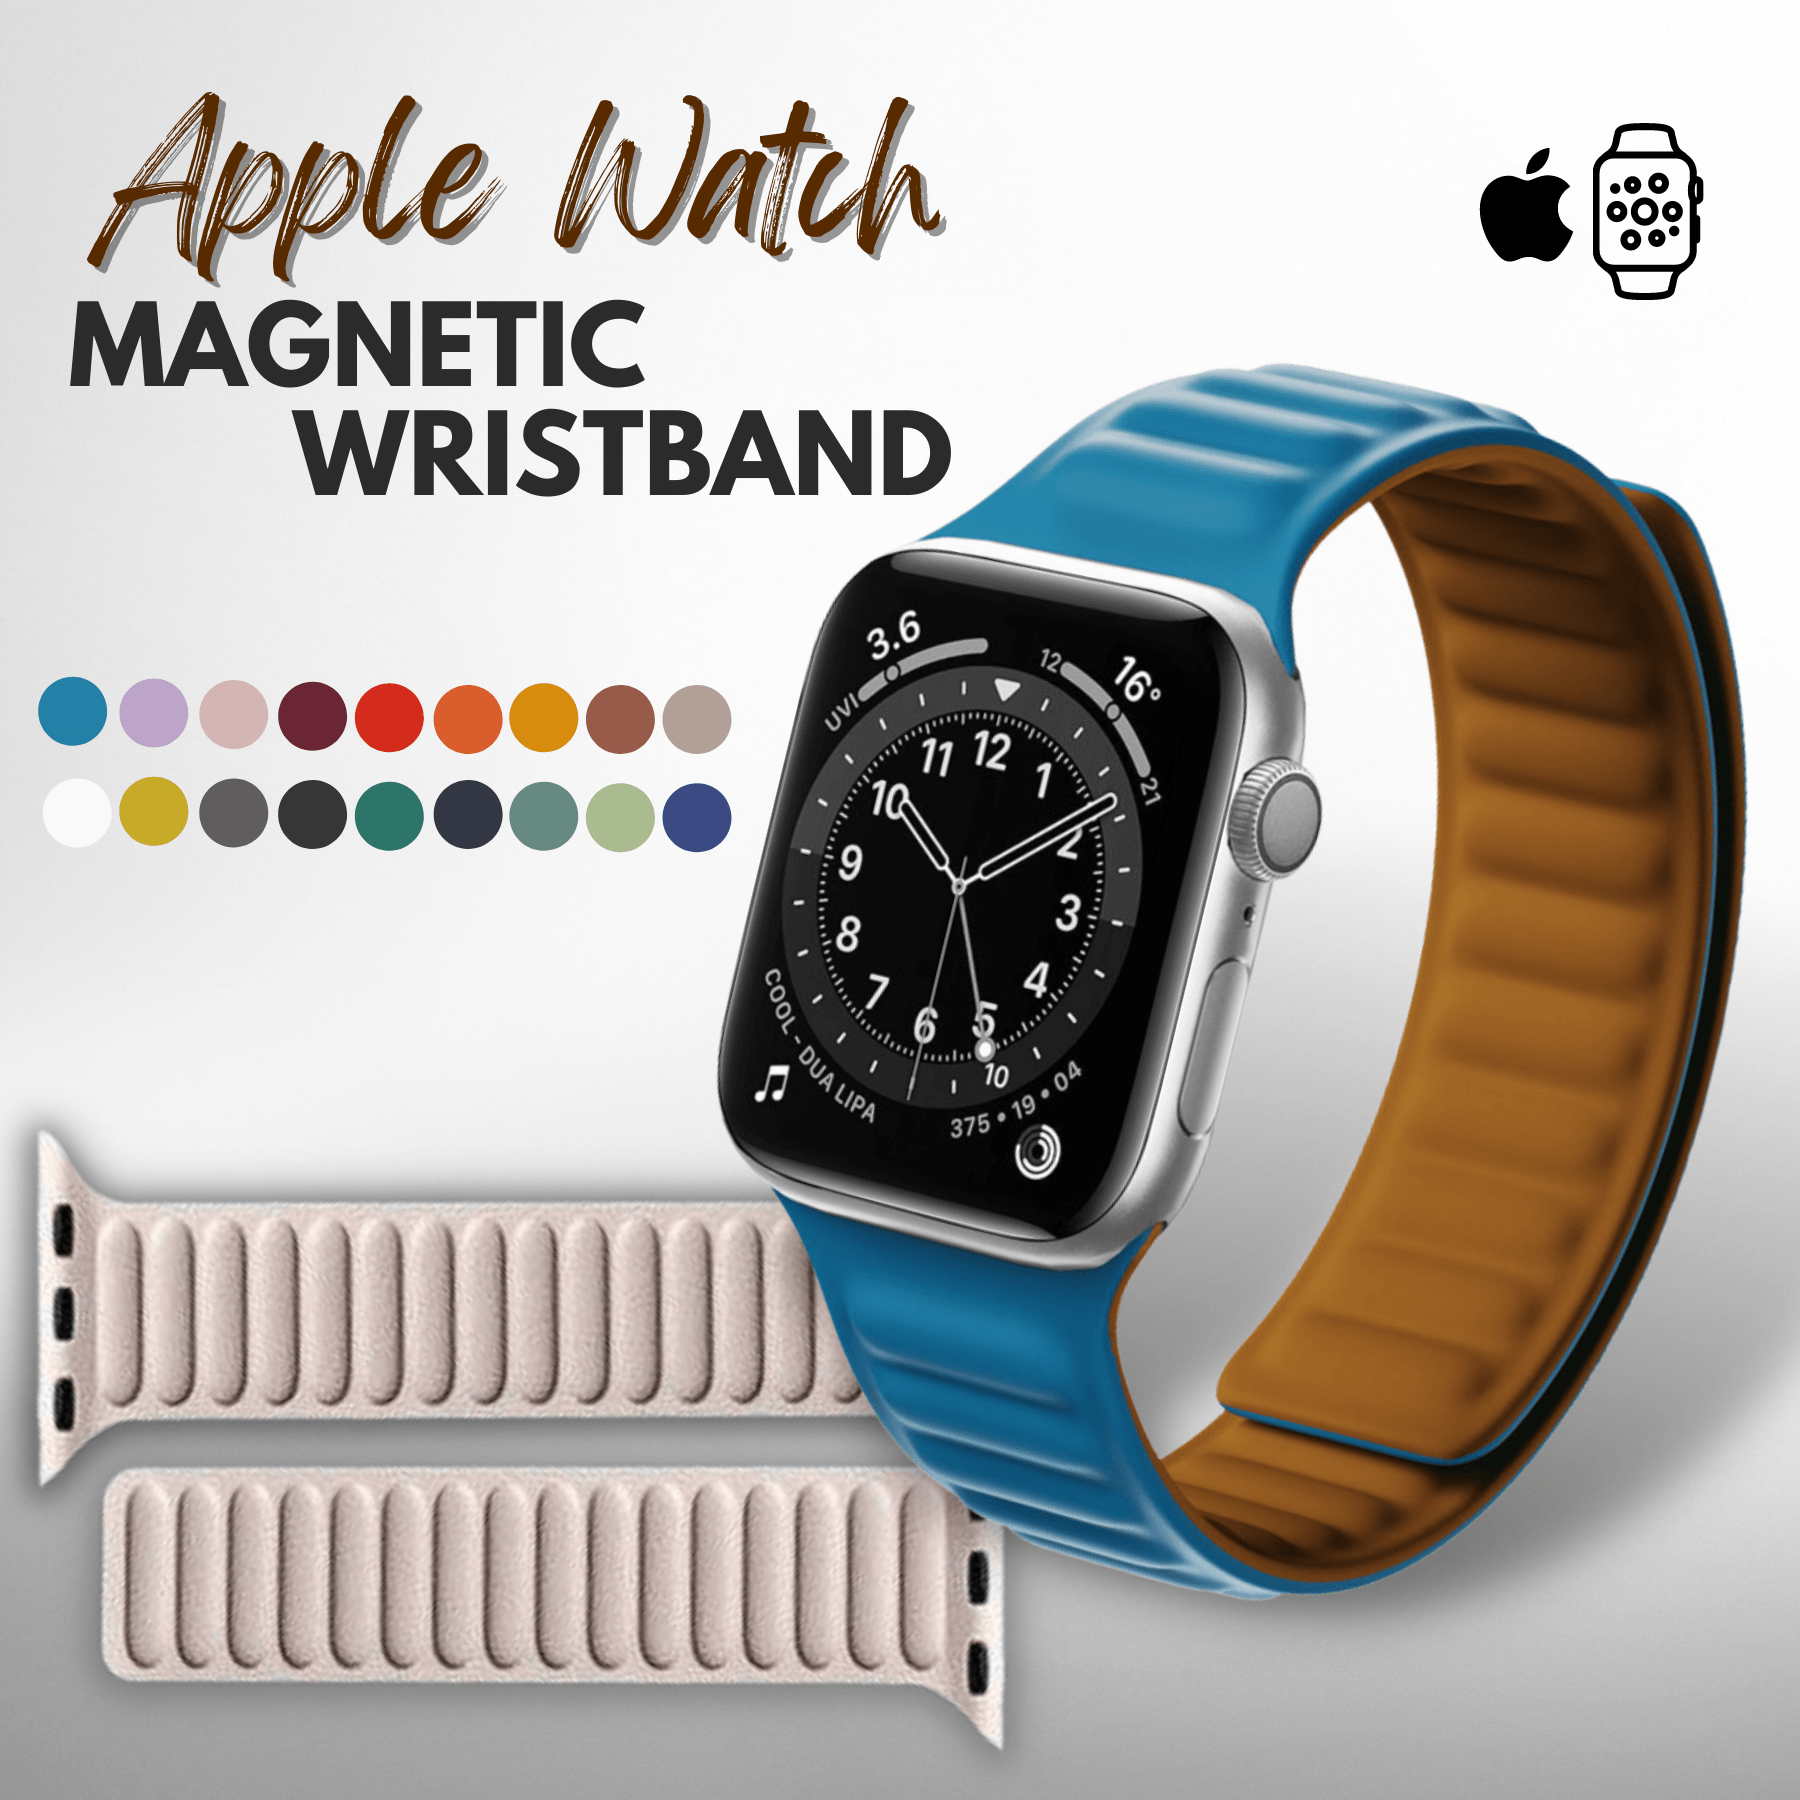 Apple Watch Magnetic Wristband